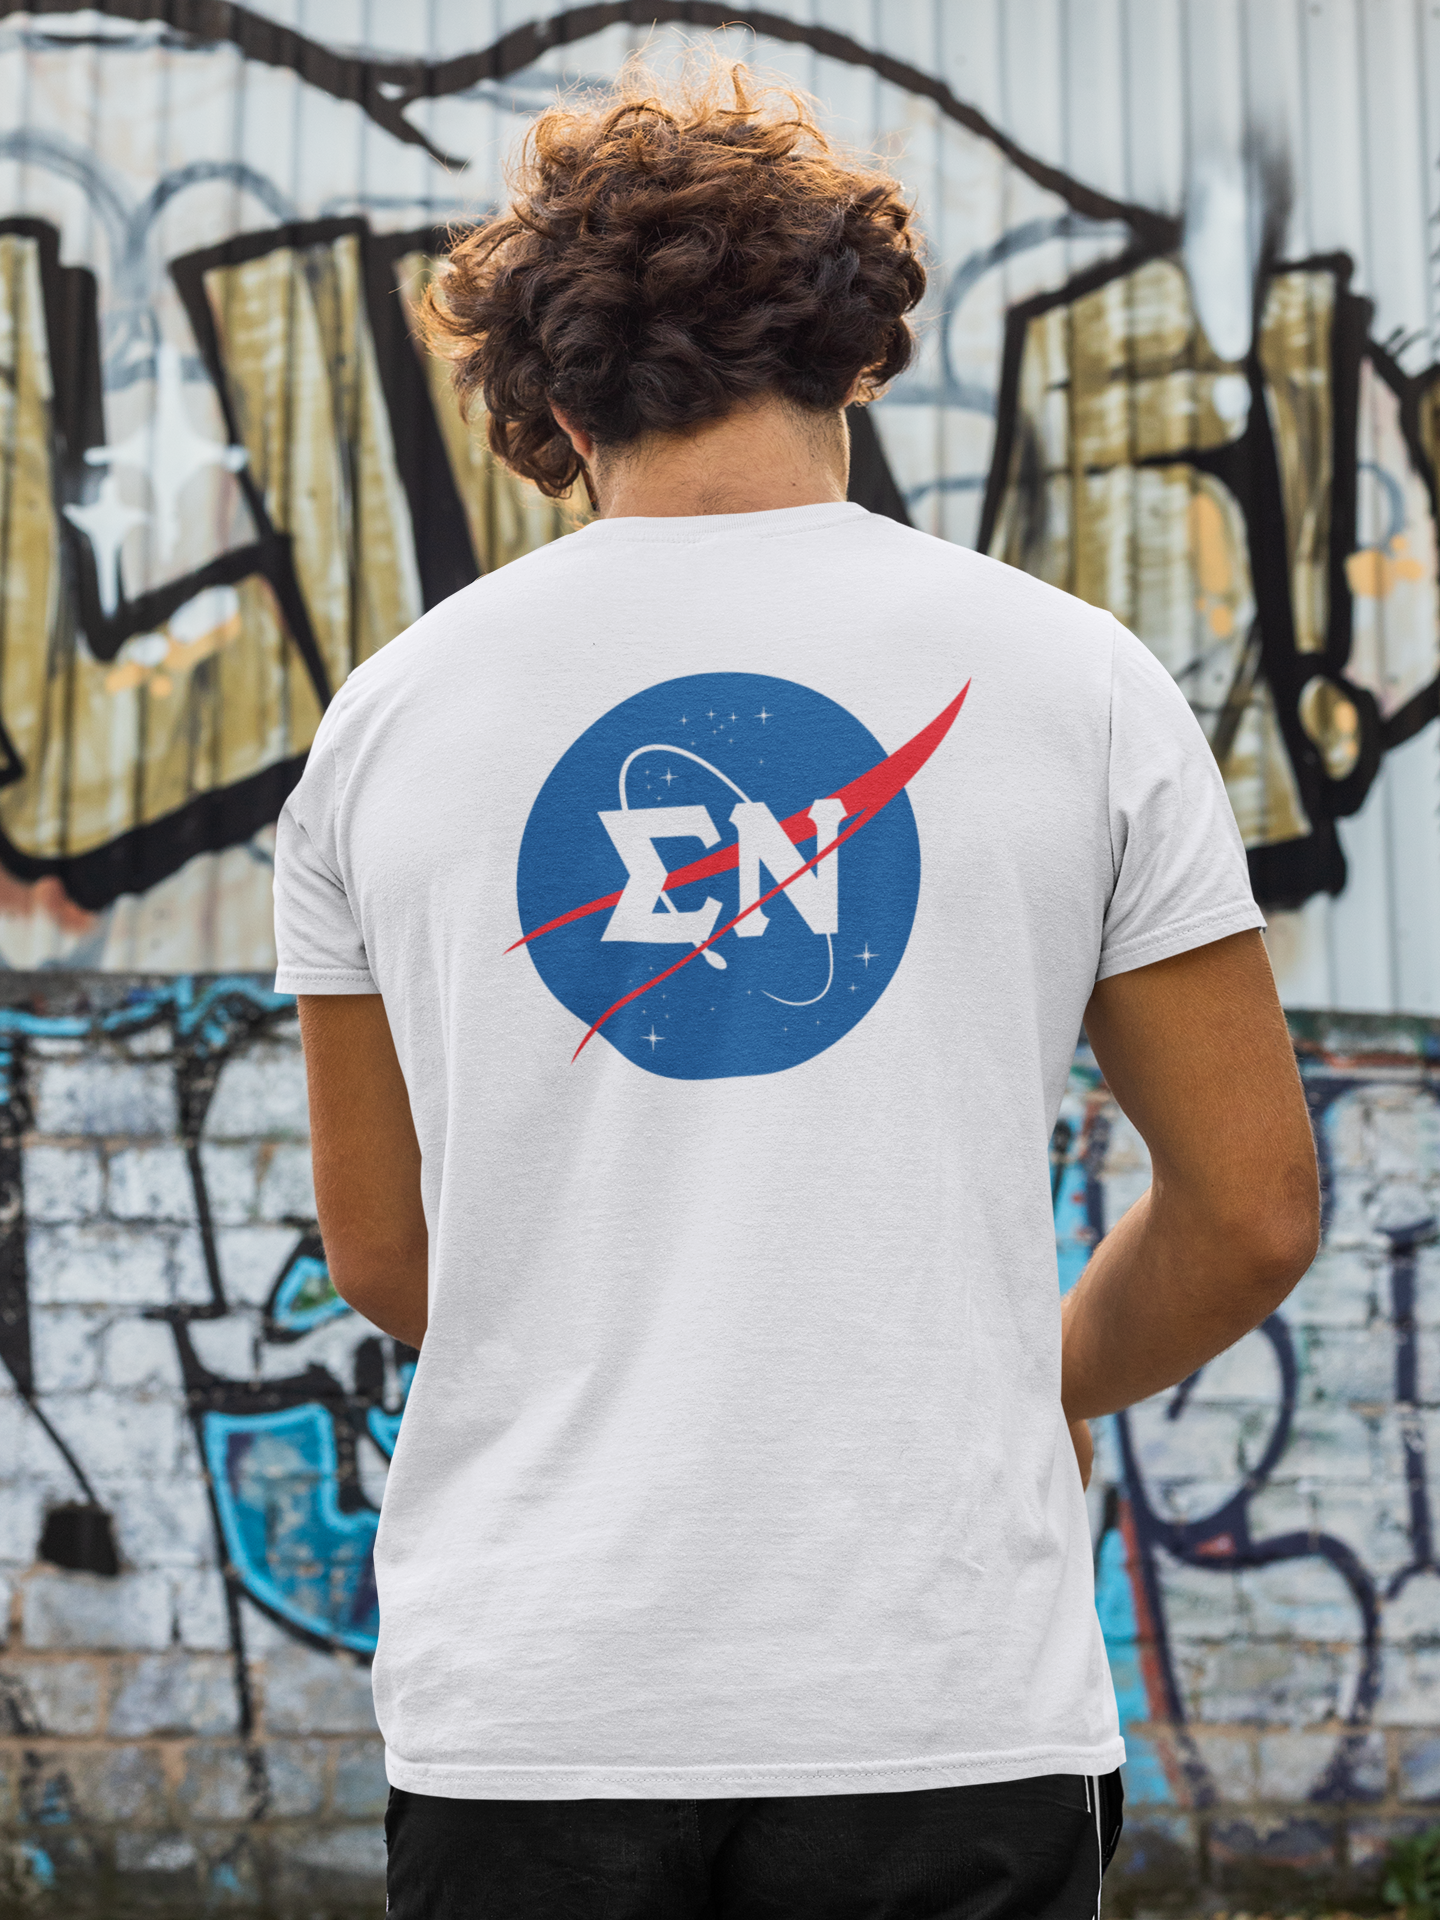 Sigma Nu Clothing, Apparel and Merchandise back model 